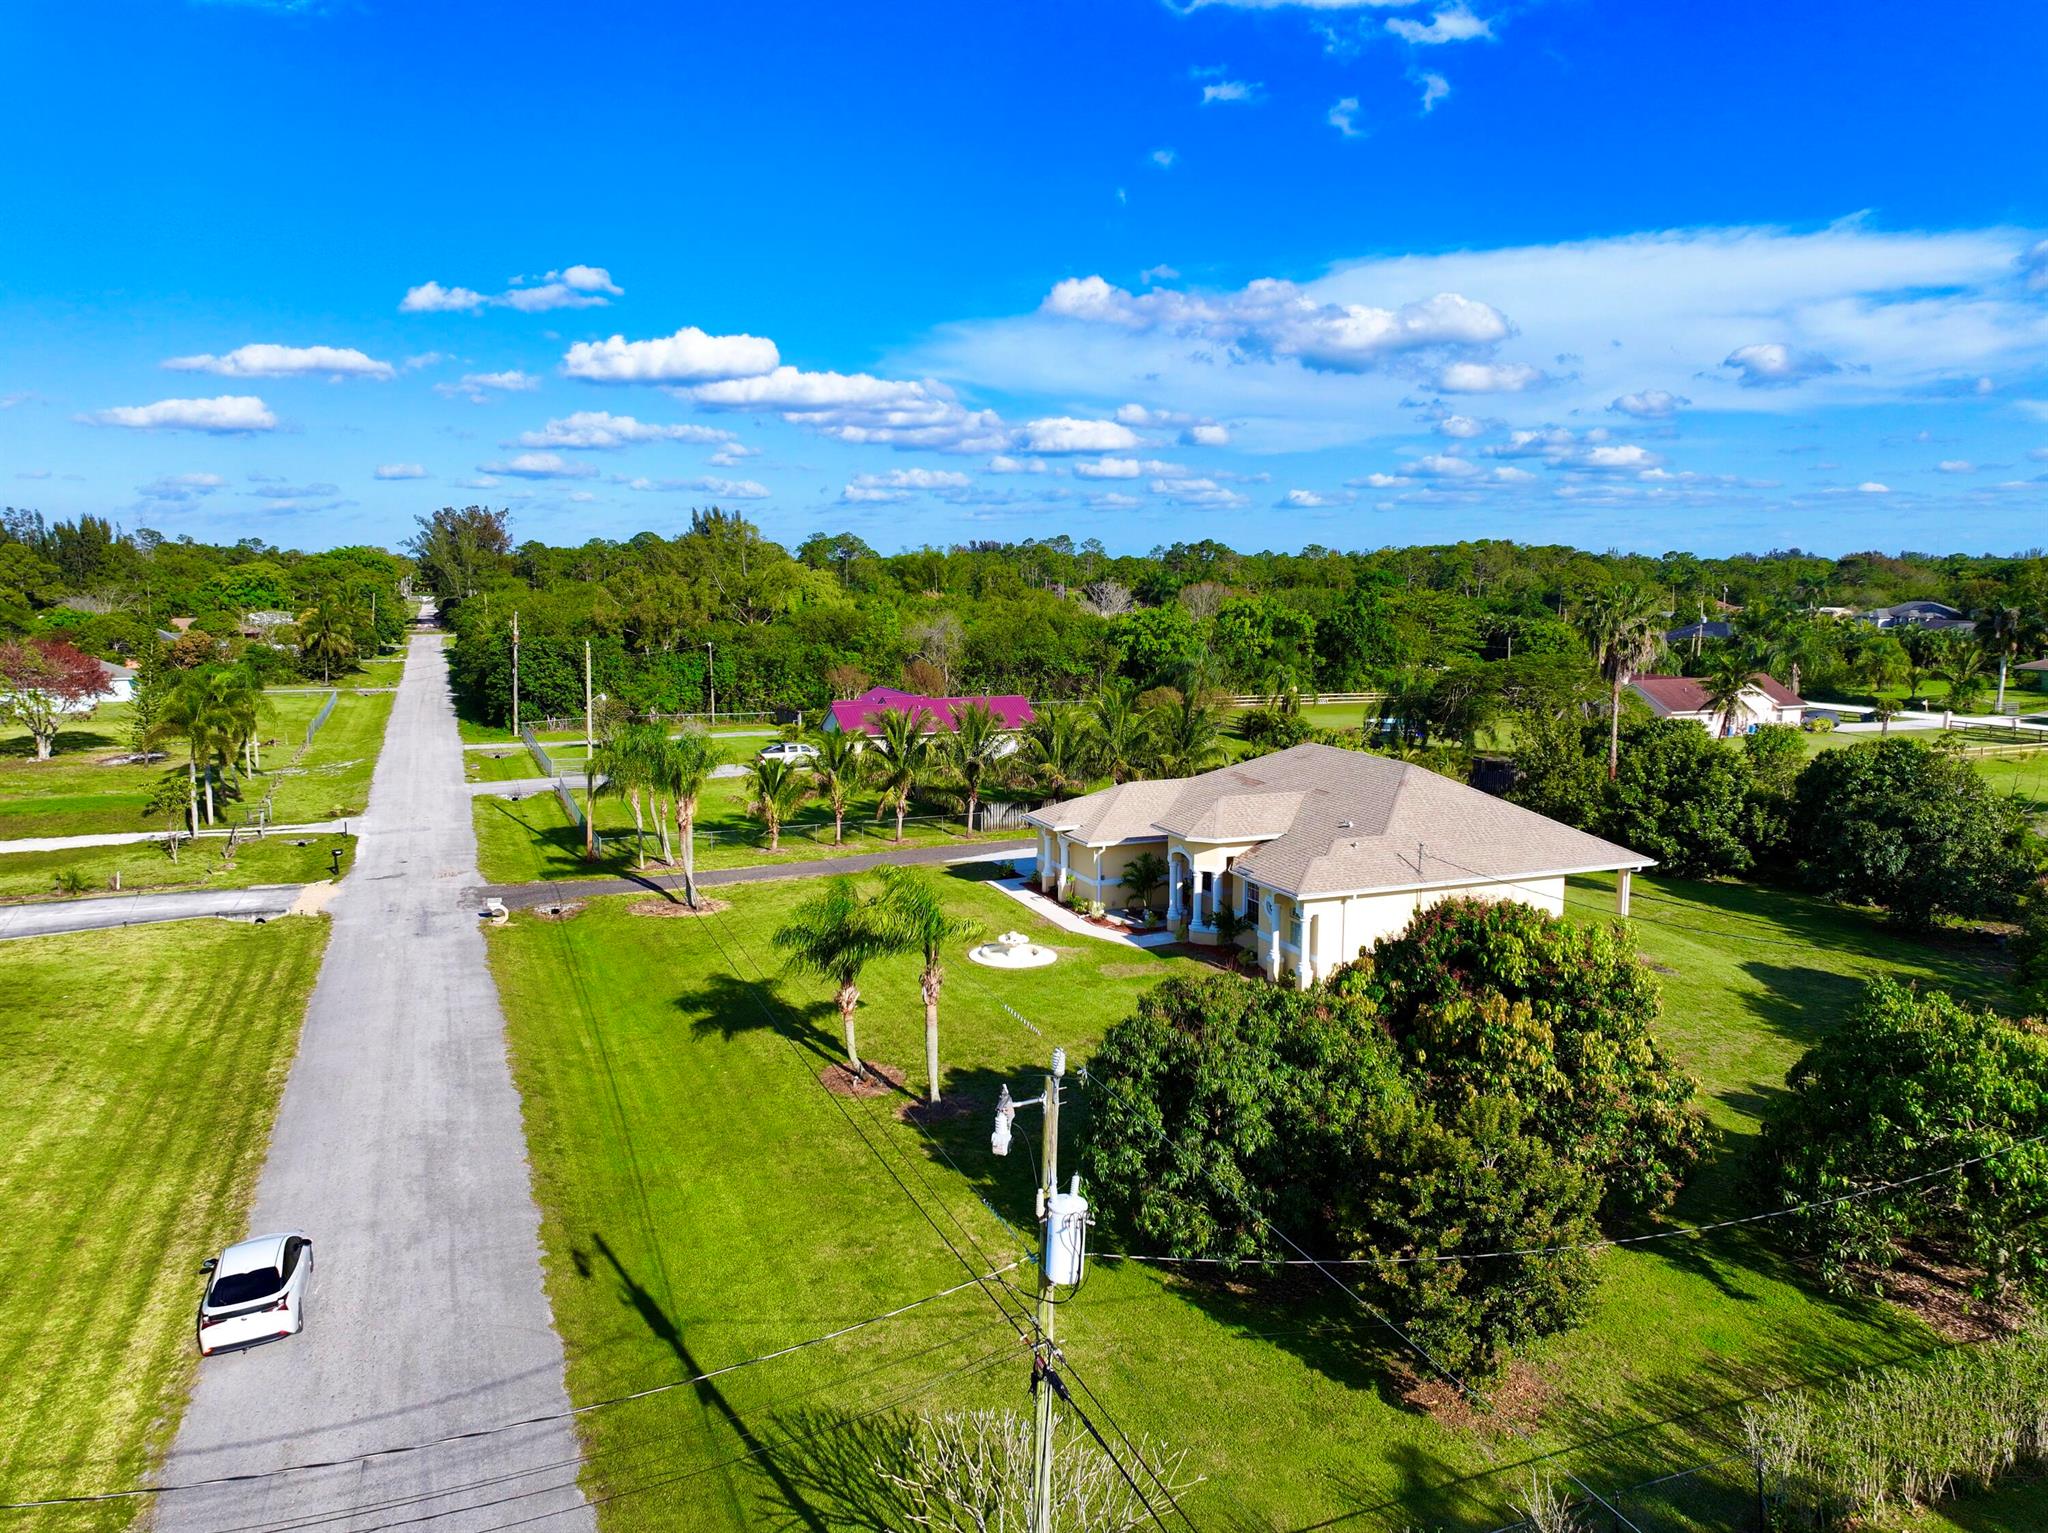 3279 total sq ft ***1.14 ACRES *** no Hoa **. ROOM FOR POOL/ GUEST HOUSE/ WORKSHOP *** WELCOME TO YOUR OWN PRIVATE PARADISE NESTLED IN THE SERENE NEIGHBORHOOD OF LOXAHATCHEE, FLORIDA ***. THIS STUNNING PROPERTY AT 17466 38TH LANE, OFFERS THE PERFECT BLEND OF LUXURY, TRANQUILITY, AND MODERN COMFORT ** GREETED BY METICULOUSLY MANICURED LANDSCAPING AND A GRAND ENTRANCE, THIS HOME BOASTS UNPARALLELED ELEGANCE AND CHARM **. STEP INSIDE TO DISCOVER A SPACIOUS AND BRIGHT INTERIOR FEATURING HIGH CEILINGS, LARGE WINDOWS THAT FLOOD THE ROOMS WITH NATURAL LIGHT, AND EXQUISITE FINISHES THROUGHOUT ** THE GOURMET KITCHEN IS A CHEFS DREAM, EQUIPPED WITH STAINLESS APPLIANCES, CUSTOM CABINETRY, AND A  FRIENDLY BREAKFAST BAR  PERFECT FOR ENTERTAINING GUEST AND THE FAMILY **  ***  NO HOA-BRING THE RV, BOAT, THE OPEN-CONCEPT LIVING AND DINING AREAS PROVIDE A SEAMLESS FLOW AND ARE IDEAL FOR BOTH INTIMATE GATHERINGS AND LARGE CELEBRATIONS **   RETREAT TO THE LUXURIOUS MASTER SUITE, COMPLETE WITH A SPA-LIKE EN-SUITE BATHROOM  WITH LARGE WALK IN CLOSETS AND BREATHTAKING VIEWS OF THE LUSH SURROUNDINGS.  ADDITIONAL 2 BEDROOMS ARE GENEROUSLY SIZED AND BEDROOM #4 HAS NO CLOSET AND CAN BE USED AS BEDROOM / OFFICE / MANCAVE / EXERCISE ROOM *** WHICH IS PERFECT FOR FAMILY MEMBERS OR GUESTS ***.  !!!  STEP OUTSIDE TO YOUR OWN PRIVATE OASIS WHERE YOU WILL ENJOY A COVERED PATIO FOR AL FRESCO DINING, AND AMPLE SPACE FOR OUTDOOR RELAXATION AND RECREATION ** MULTIPLE VARIETY OF MATURE EXOTIC FRUIT WHICH  INCLUDES- DIFFERENT VARIETIES OF MANGOES  , MULTIPLE VARIETIES OF AVOCADOS ,   LEECHES, LONGAN, SUGAR APPLE, COCONUTS, TAMARIND , CUSTARD APPLE, GUAVA, ANDE LOTS MORE  *** THE EXPANSIVE BACKYARD IS A BLANK CANVAS AWAITING YOUR PERSONAL TOUCH* CREATE THE OUTDOOR OASIS OF YOUR DREAMS !!!! LOTS OF ROOM FOR CUSTOM POOL / WORKSHOP AND GUEST HOUSE**
LOCATED IN THE HIGHLY SOUGHT AFTER NEIGHBORHOOD OF LOXAHATCHEE FLORIDA, THIS PROPERTY OFFERS THE PERFECT COMBINATION OF PRIVACY AND CONVENIENCE.  ENJOY THE PEACE AND QUIET OF COUNTRY LIVING WHILE BEING JUST A SHORT DRIVE AWAY FROM TOP RATED SCHOOLS, SHOPPING, DINING, AND ENTERTAINMENT OPTIONS *** DON'T MISS THIS RARE OPPORTUNITY TO OWN A PIECE OF PARADISE IN LOXAHATCHEE** SCHEDULE YOUR SHOWING TODAY AND EXPERIENCE THE LUXURY AND SERENITY THAT THIS EXCEPTIONAL PROPERTY HAS TO OFFER ** NO HOA- BRING THE RV, BOAT, TRAILER AND PETS  ***